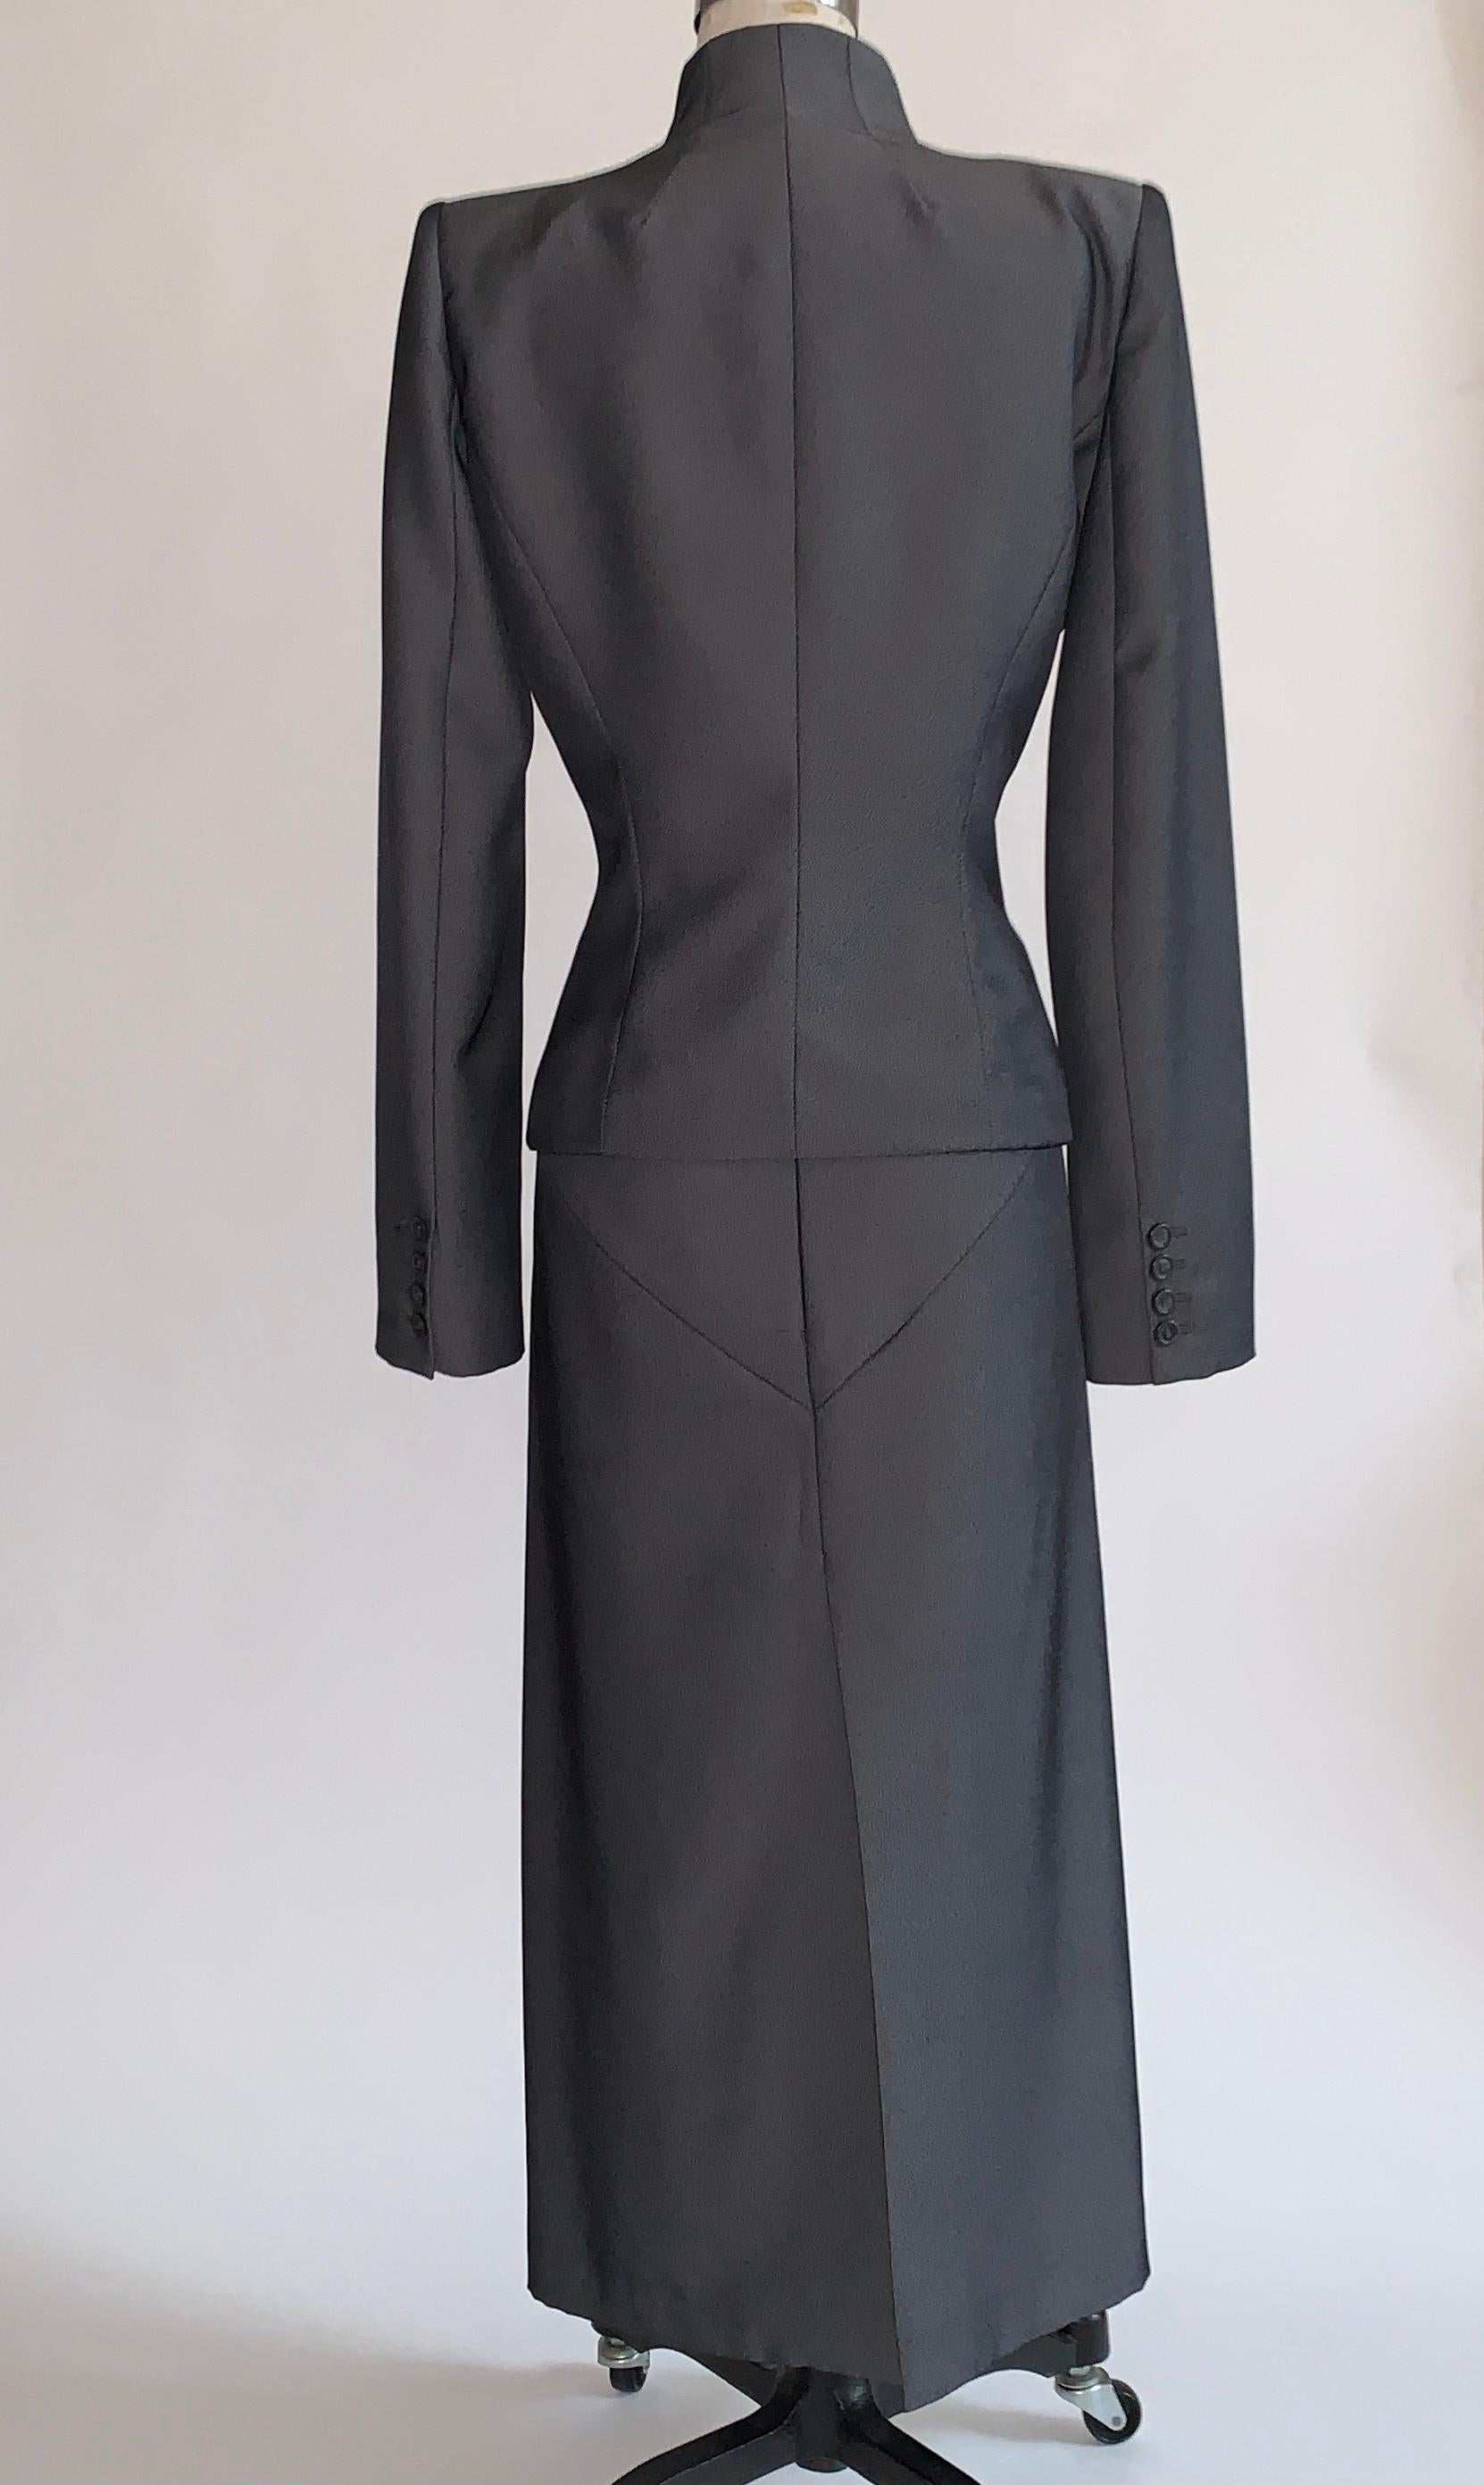 Black Alexander Mcqueen 1998 Joan Skirt Suit with Zippered Jacket and Logo Red Lining For Sale